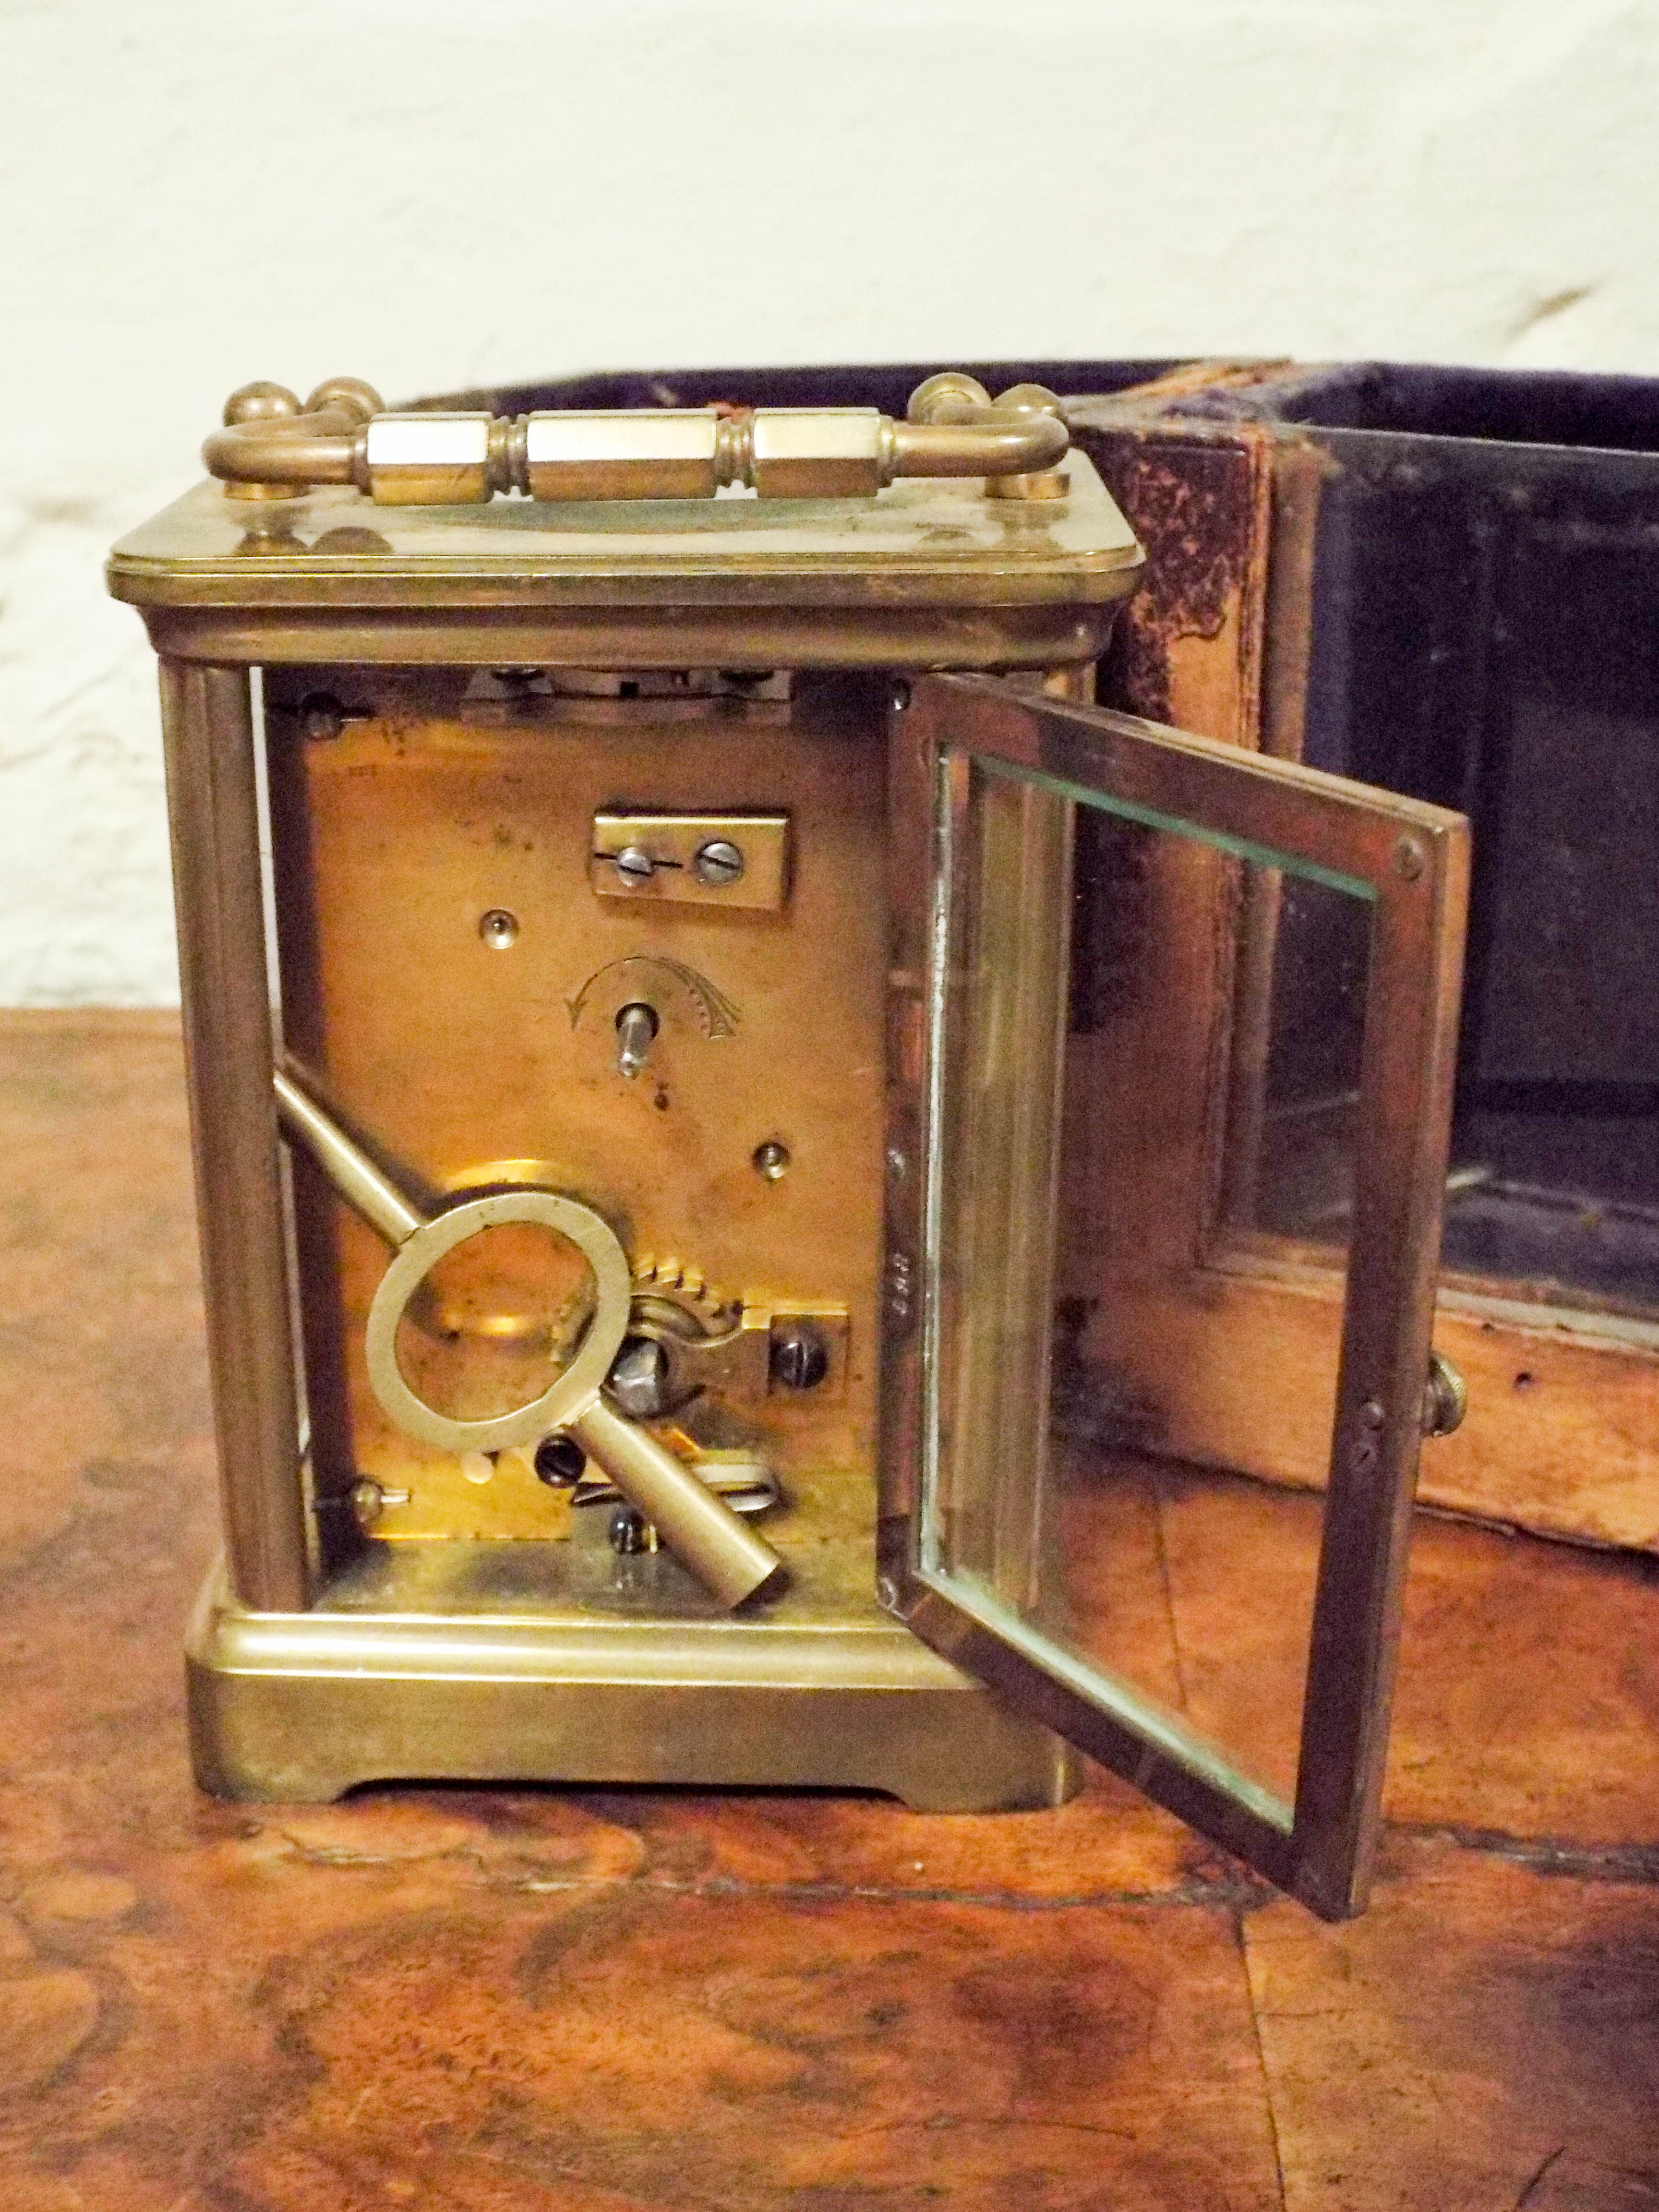 A gilt brass carriage clock in a leather travelling case with a key - Bild 2 aus 2